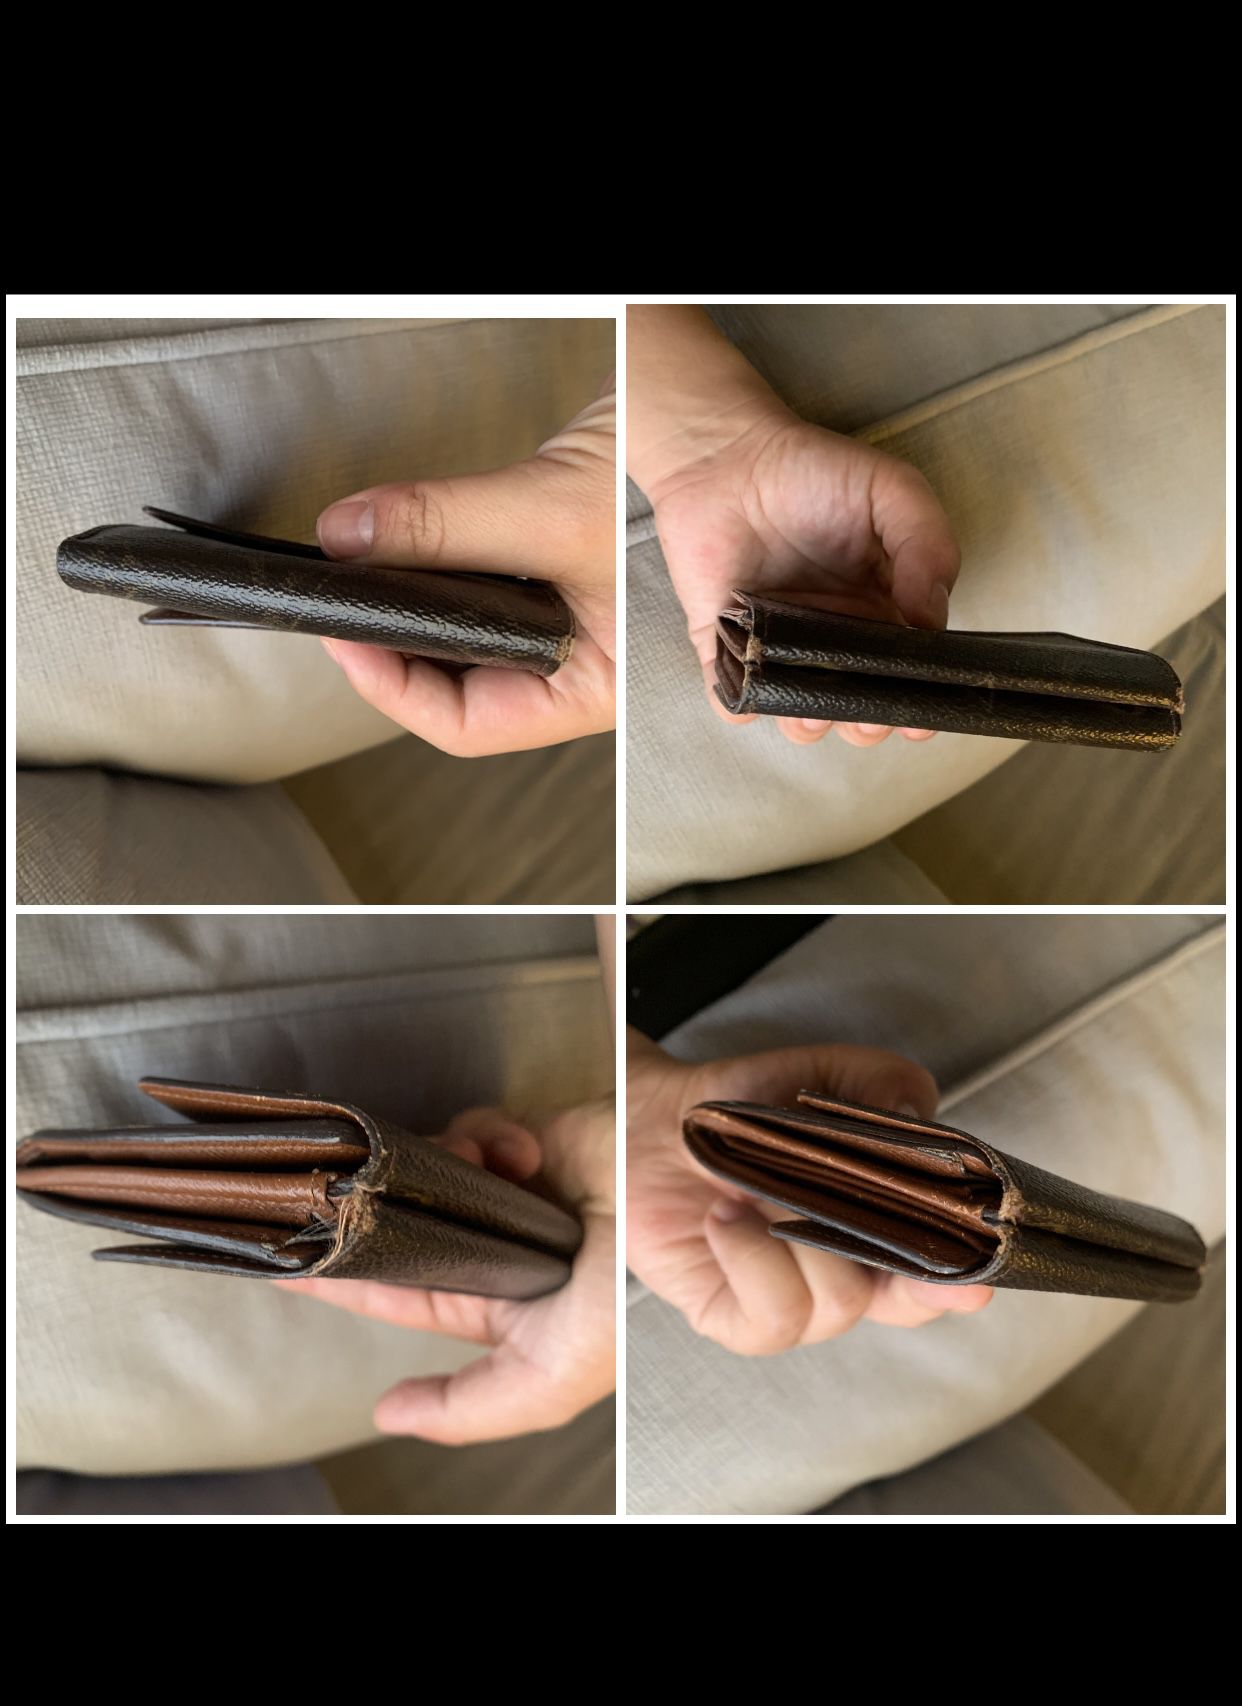 Louis Vuitton Coin Purse Josephine Wallet Insert $120 Today Only for Sale  in Stockton, CA - OfferUp